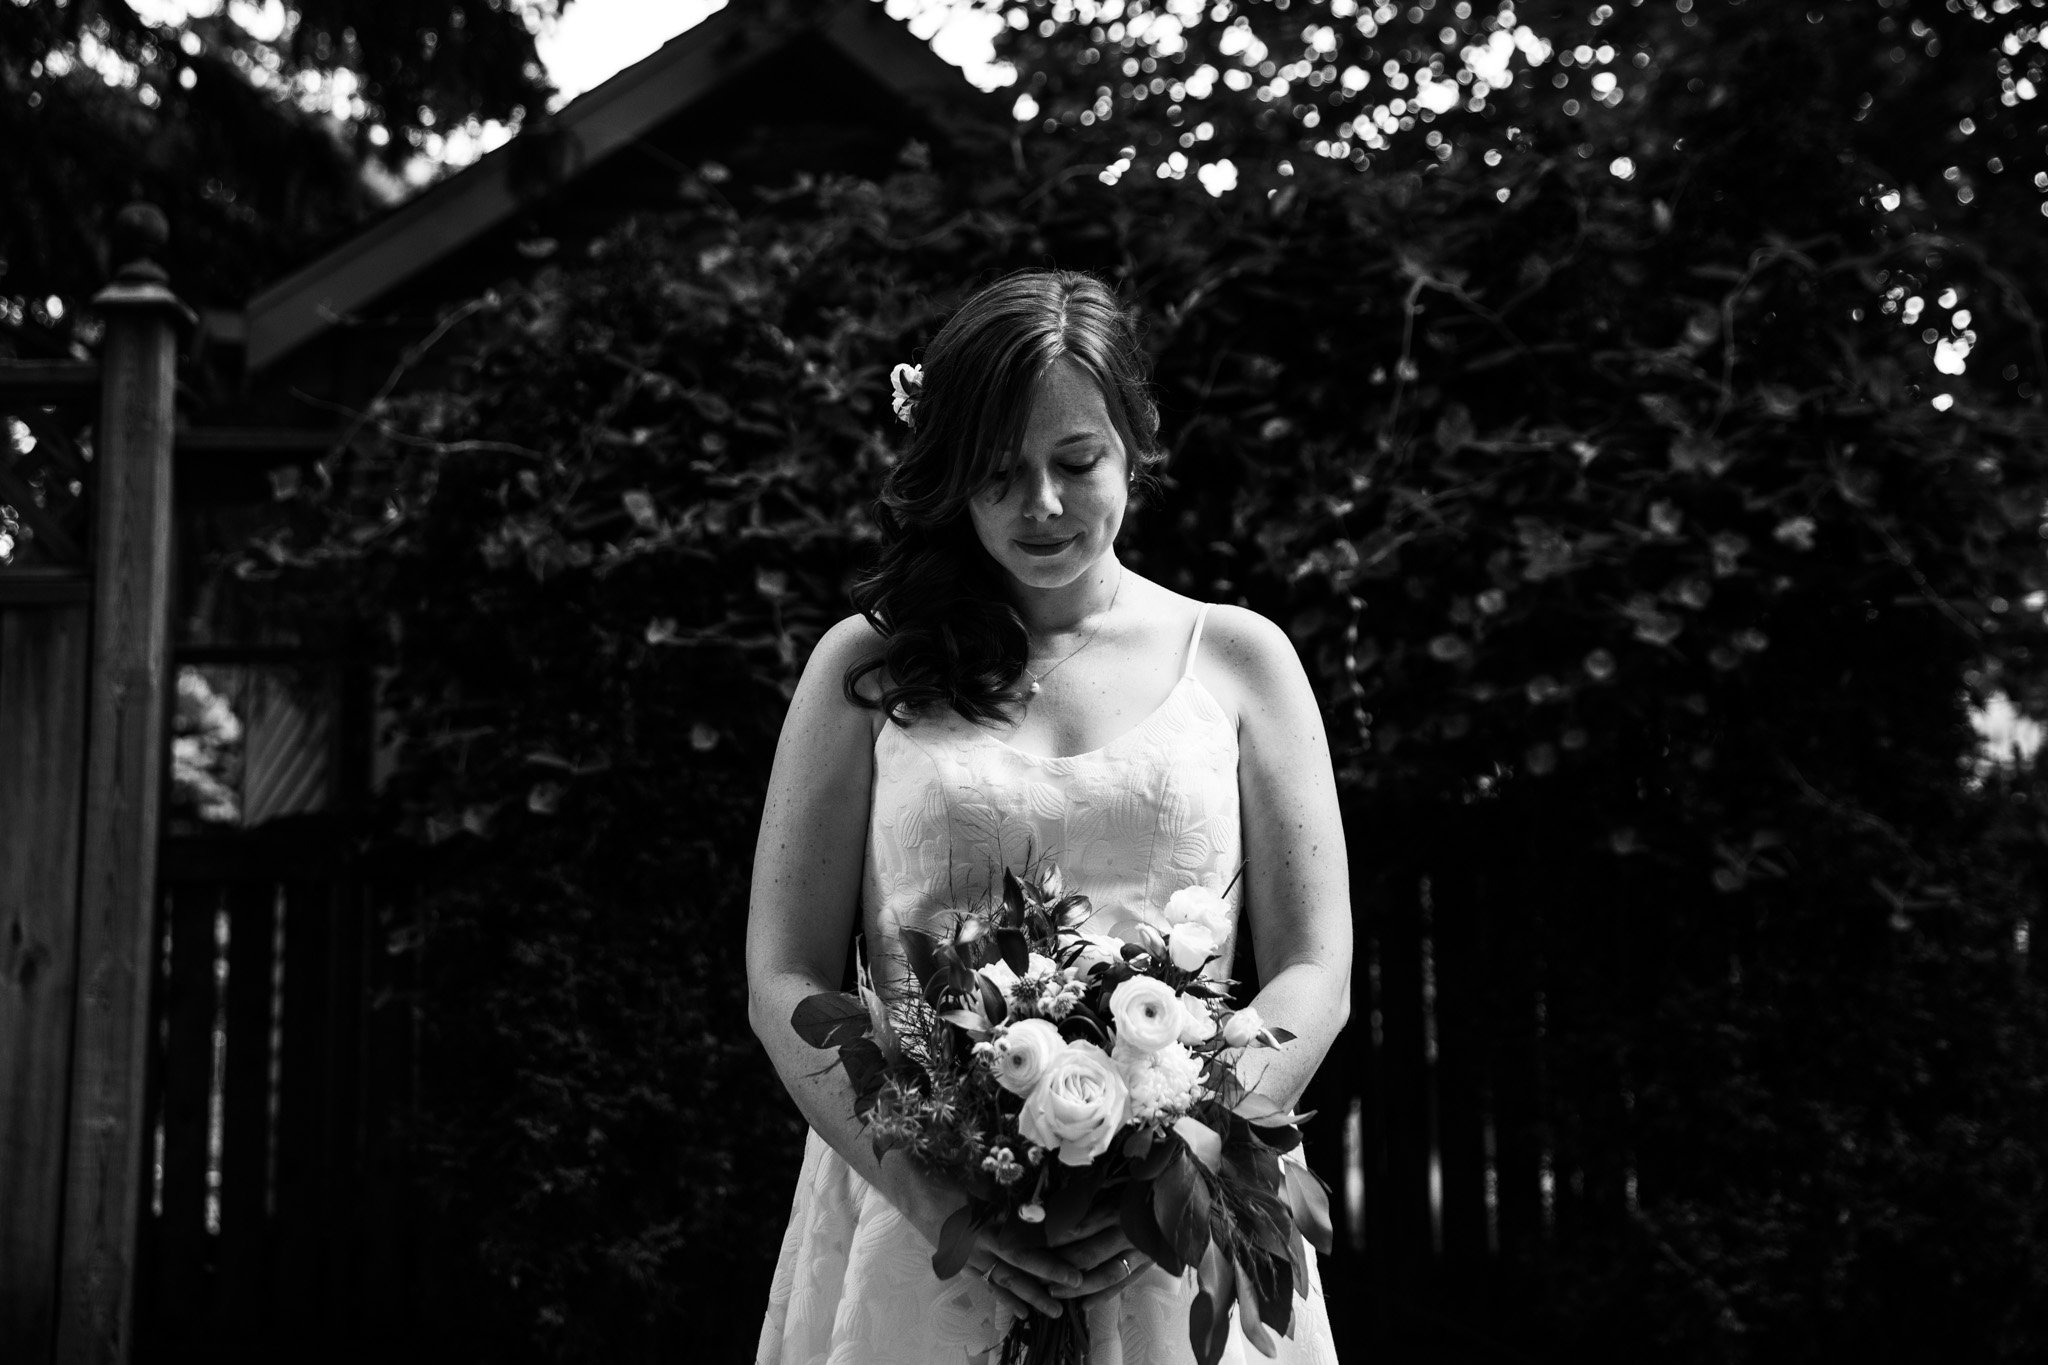 bride looking down at flowers - black and white wedding photography.jpg